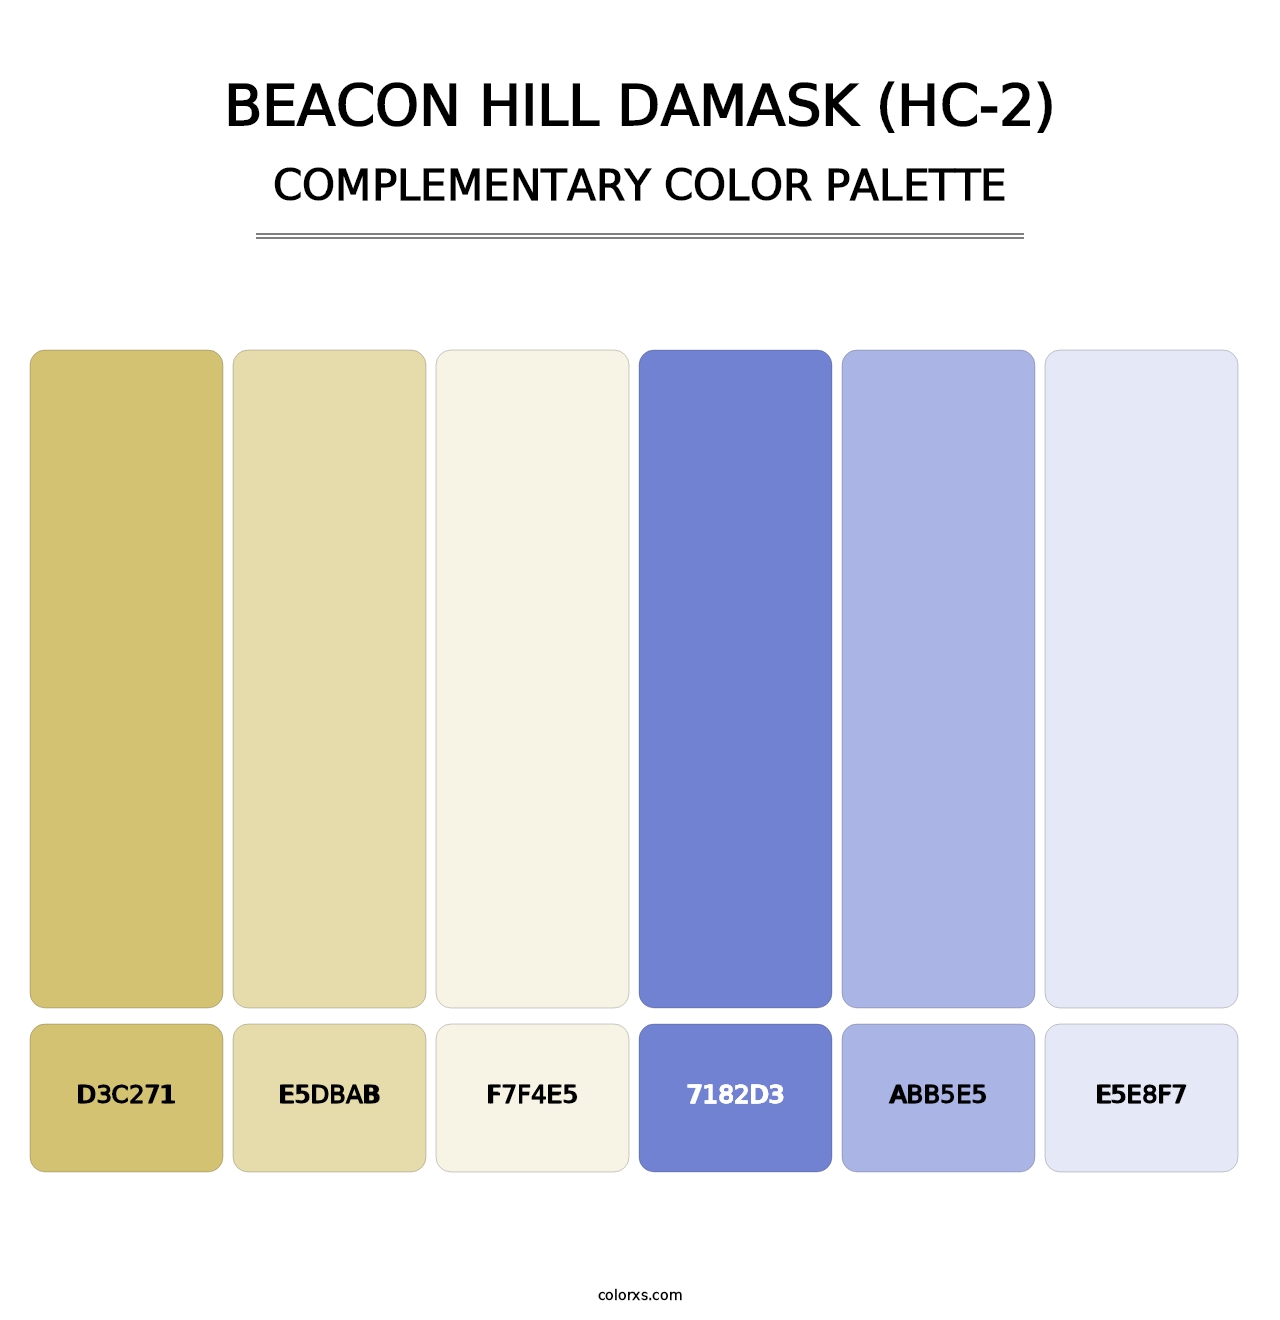 Beacon Hill Damask (HC-2) - Complementary Color Palette